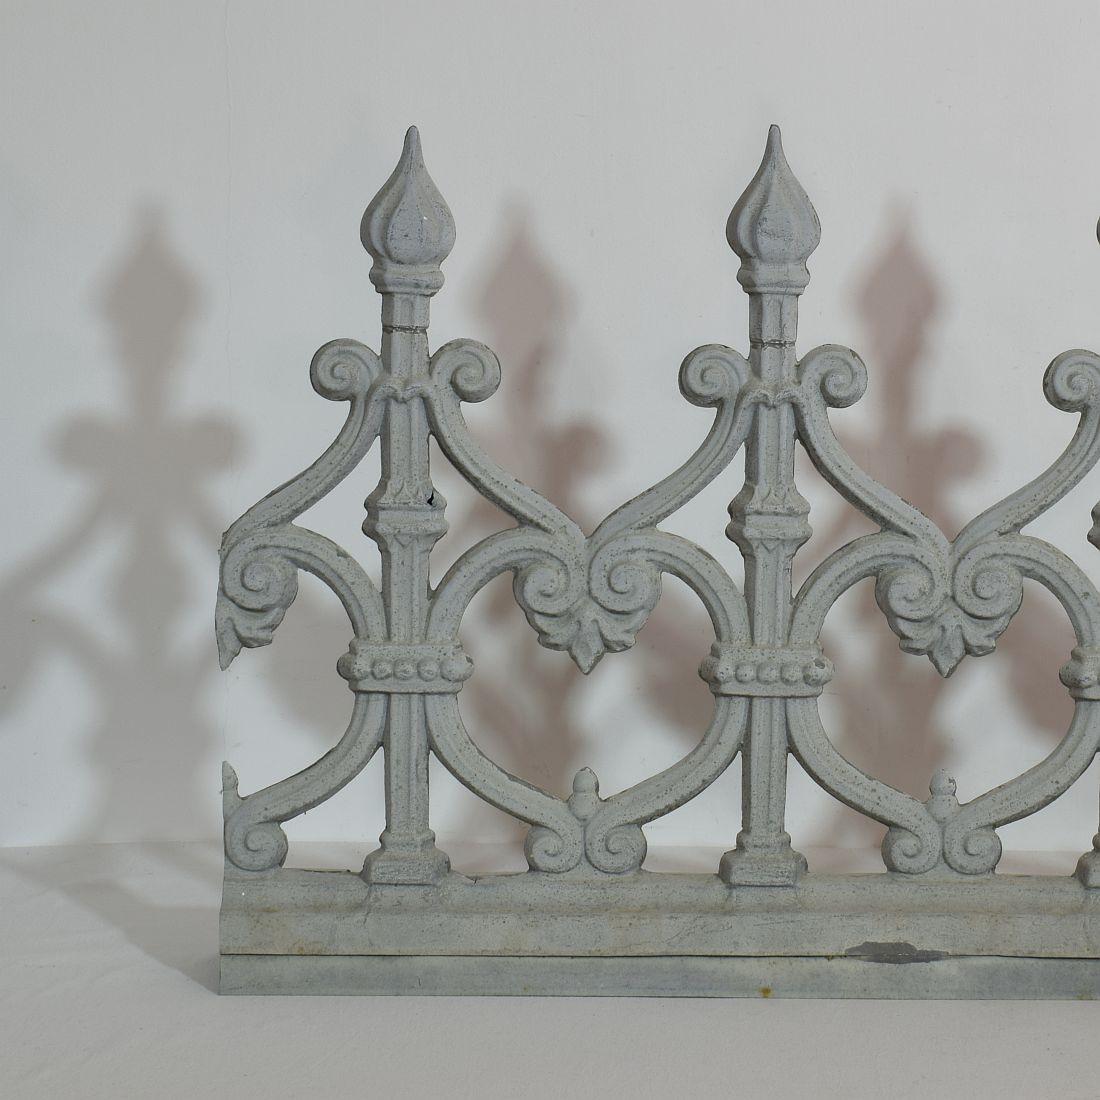 Pair of 19th Century French Zinc Architectural Roof Ornaments or Finials 1